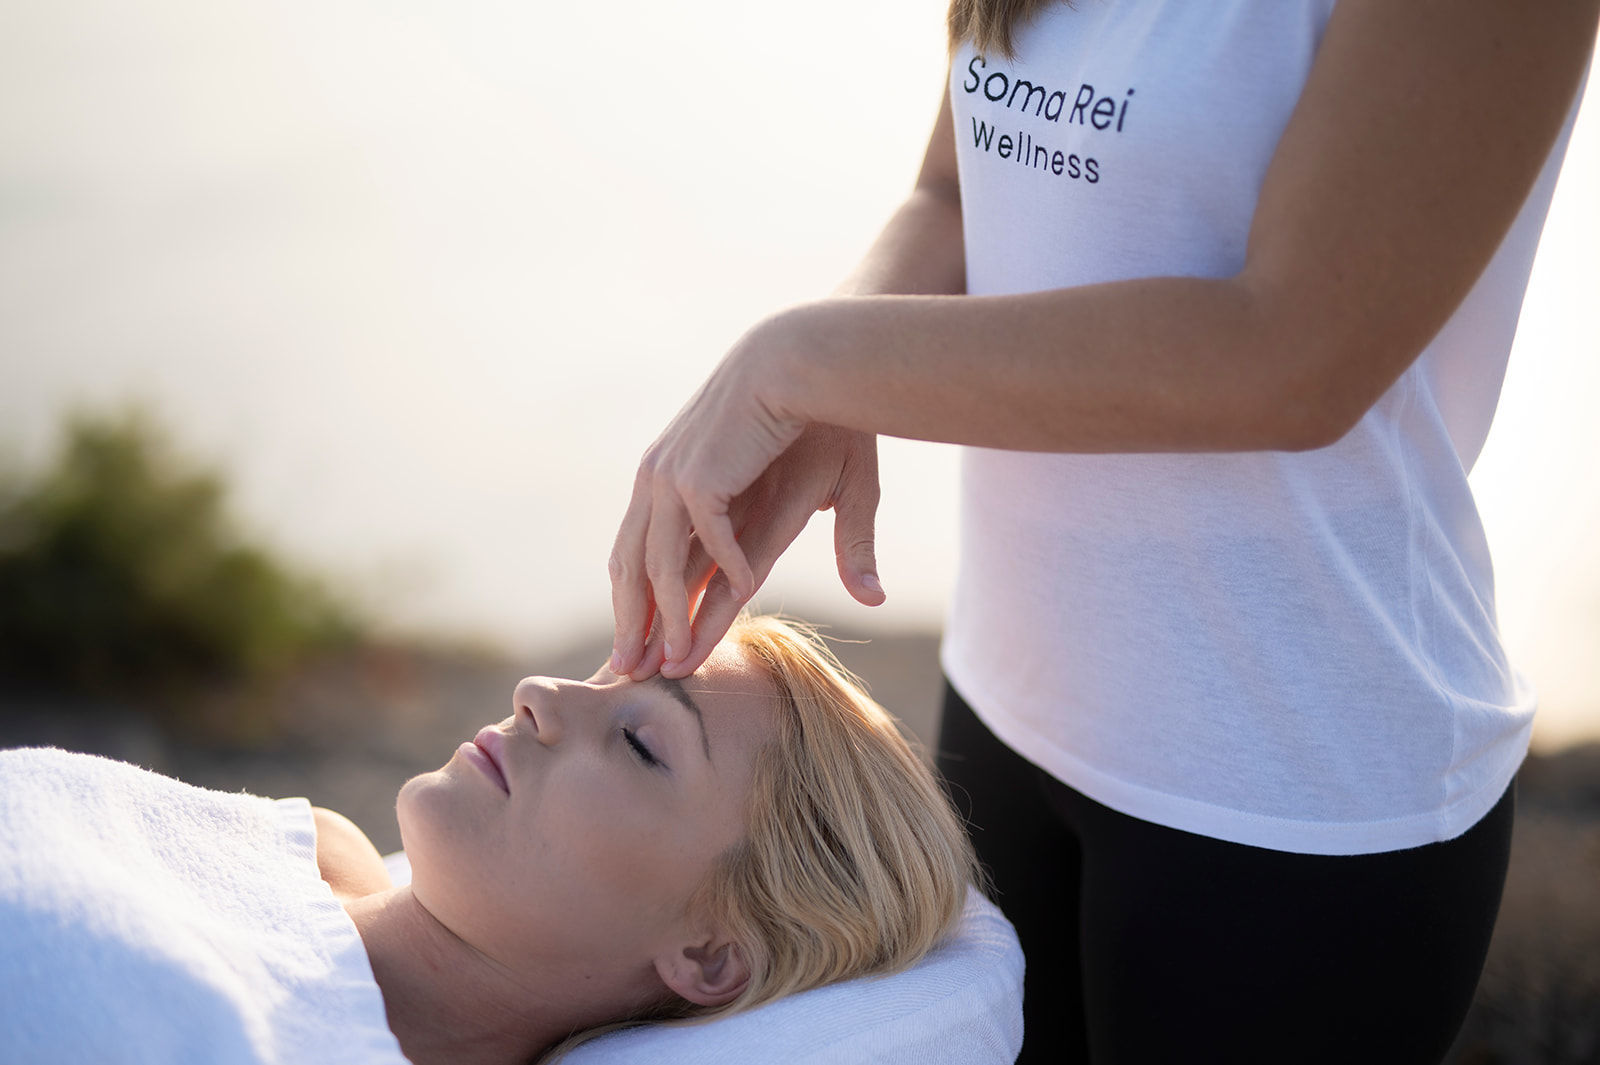 Santorini Zen Ritual Massage: Total Relaxation with our therapist's soothing Facial Massage